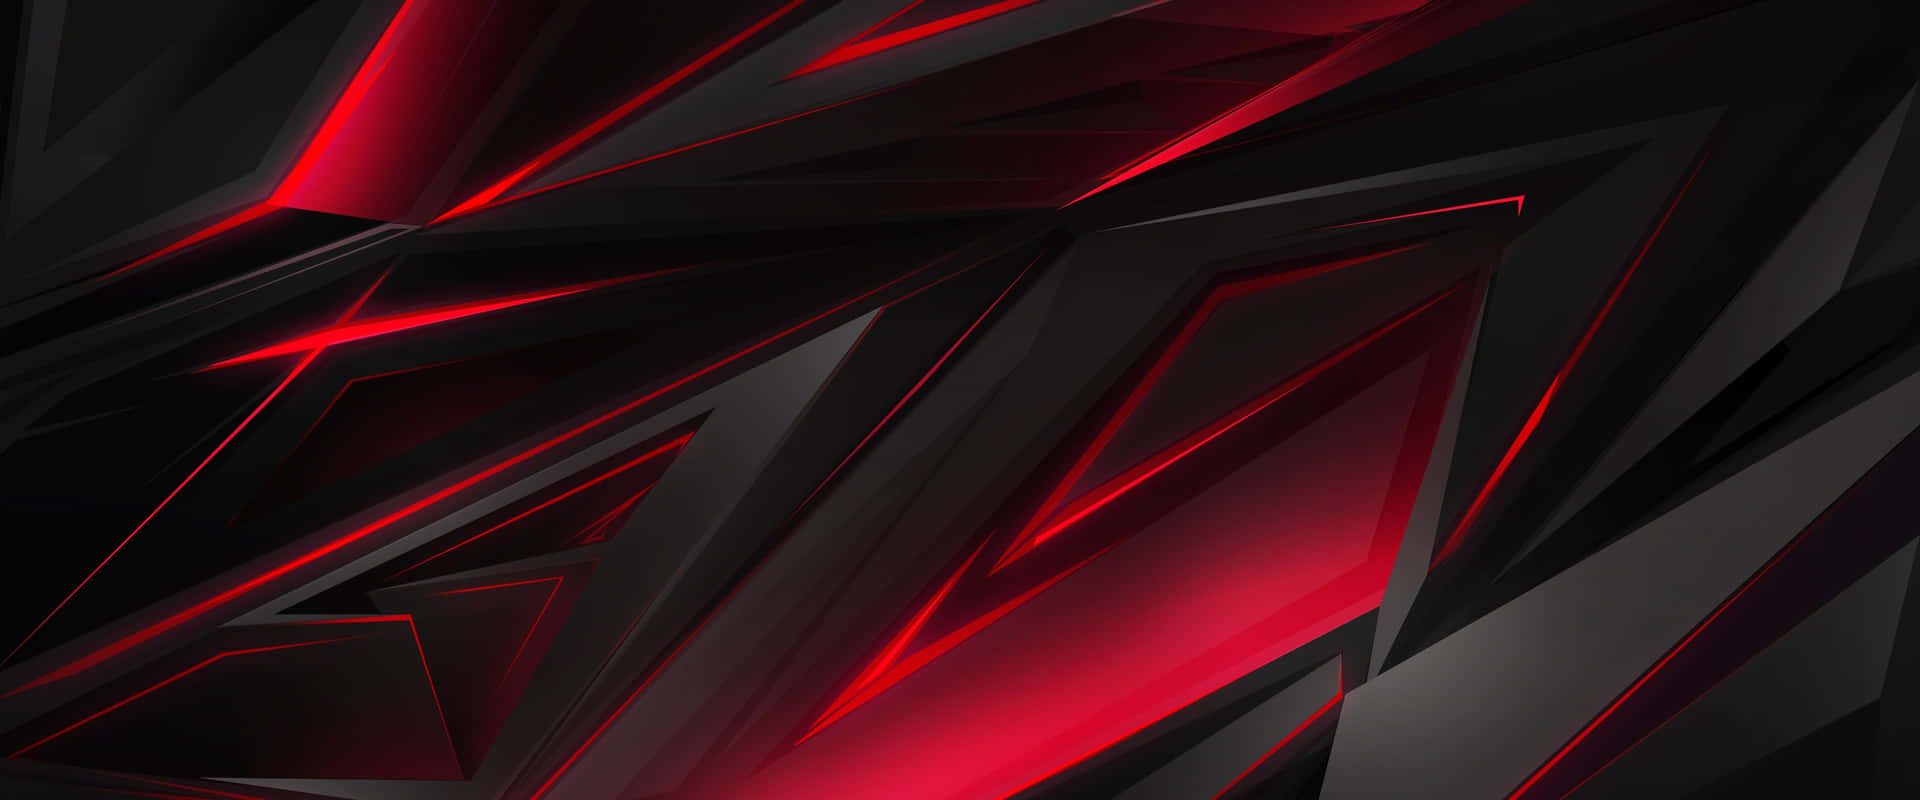 A Black And Red Abstract Background With Triangles Wallpaper